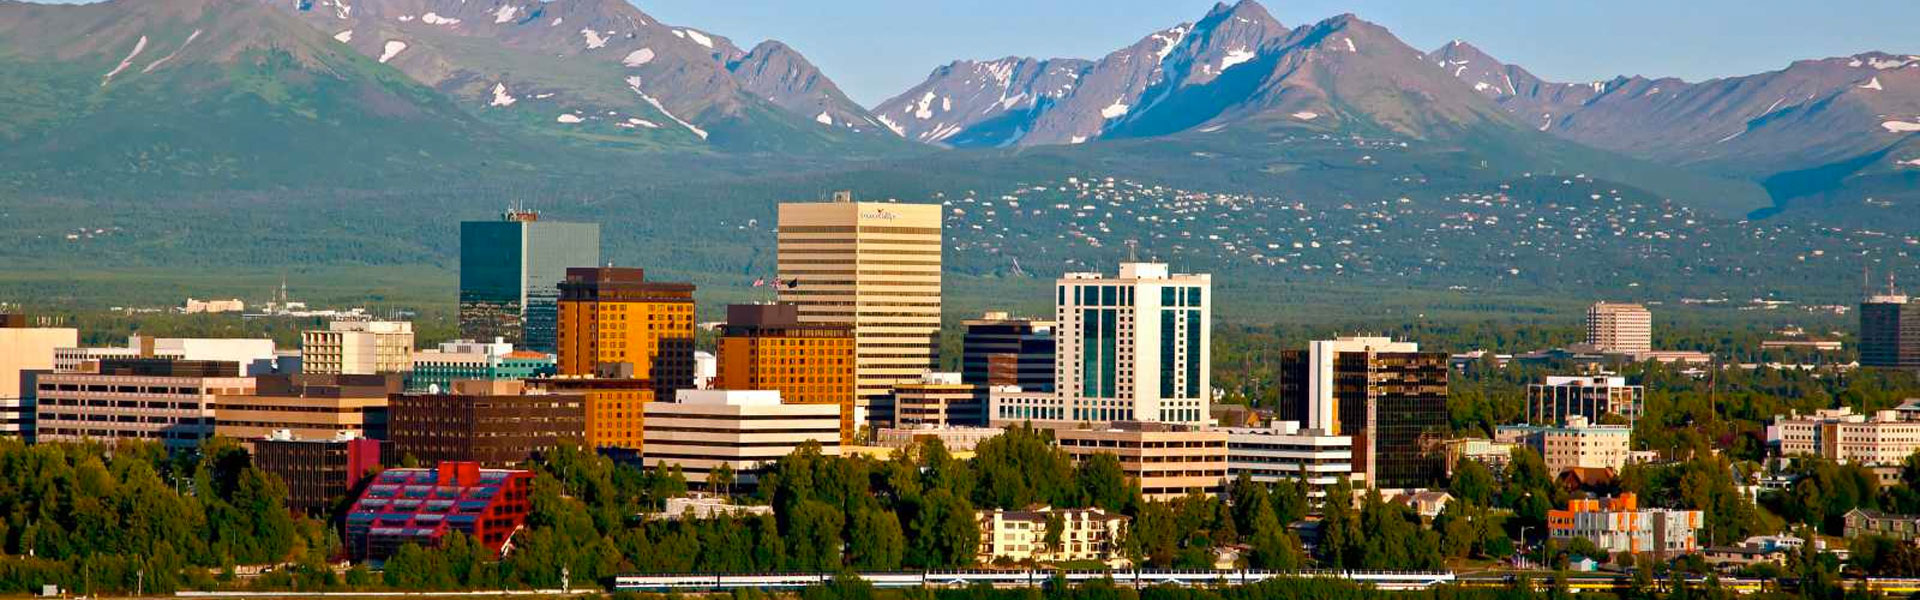 Anchorage Vacations and Alaska Train Tours